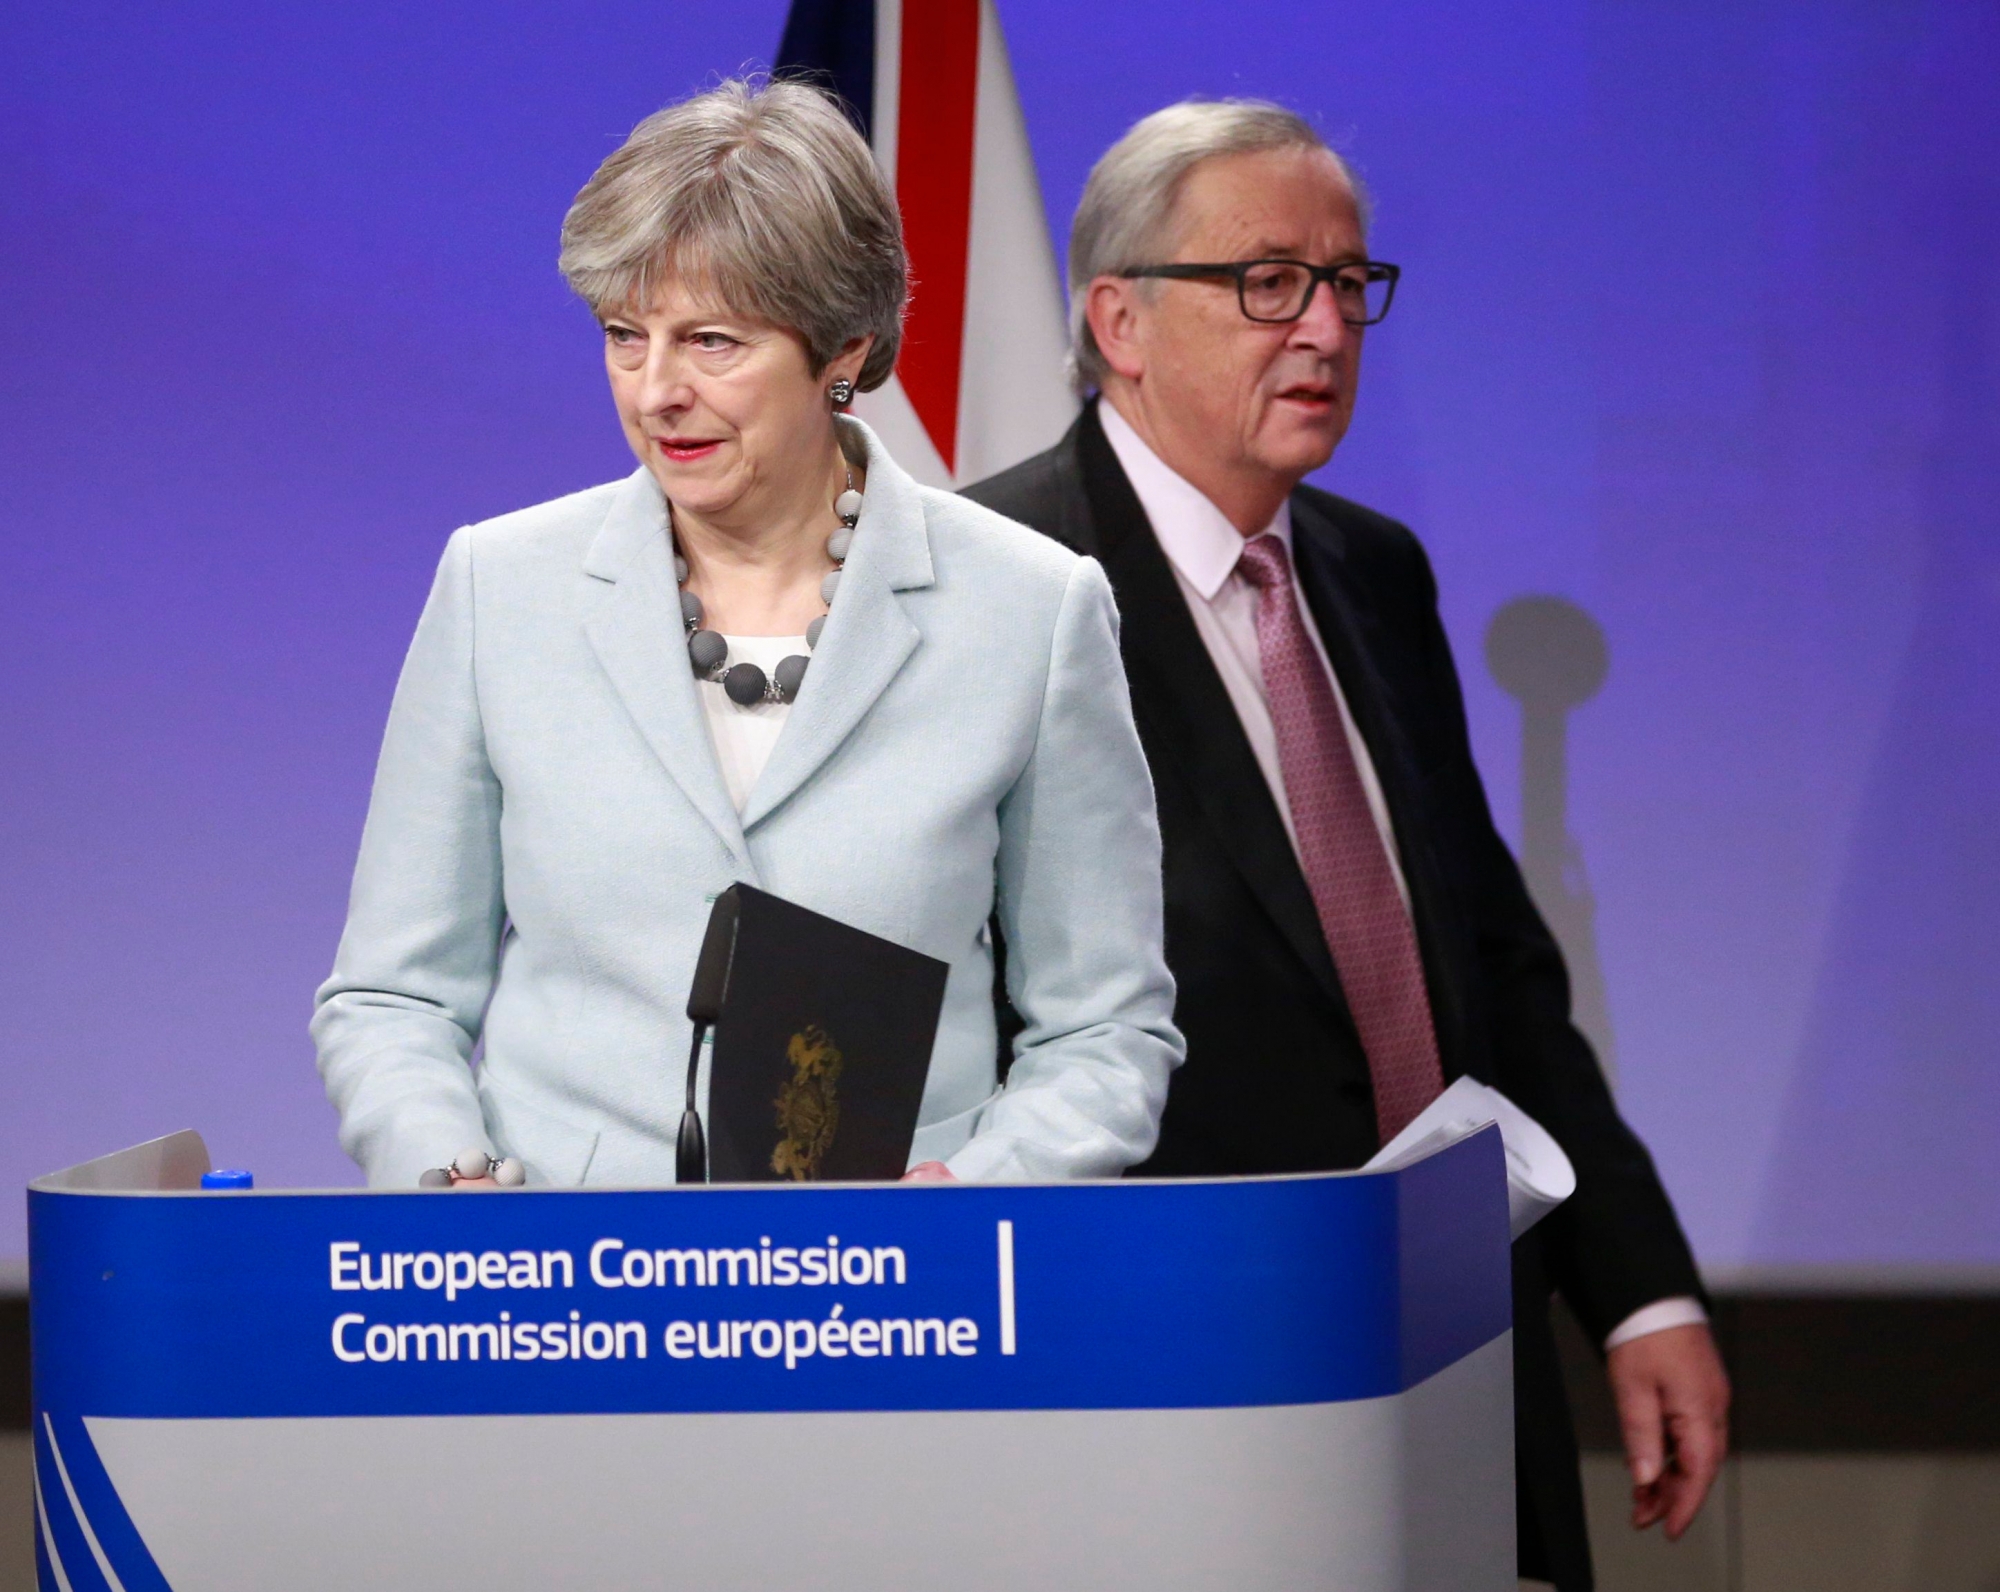 epa06375780 British Prime Minister Theresa May attends a press conference with EU Commission President Jean-Claude Juncker (R) prior to a meeting on Brexit Negotiations in Brussels, Belgium, 08 December 2017. Reports state that Theresa May is in Brussels after talks on the issue of the Irish border where she will meet with European Commission President Jean-Claude Juncker and EU negotiator Michel Barnier.  EPA/OLIVIER HOSLET BELGIUM EU BREXIT THERESA MAY IN BRUSSELS